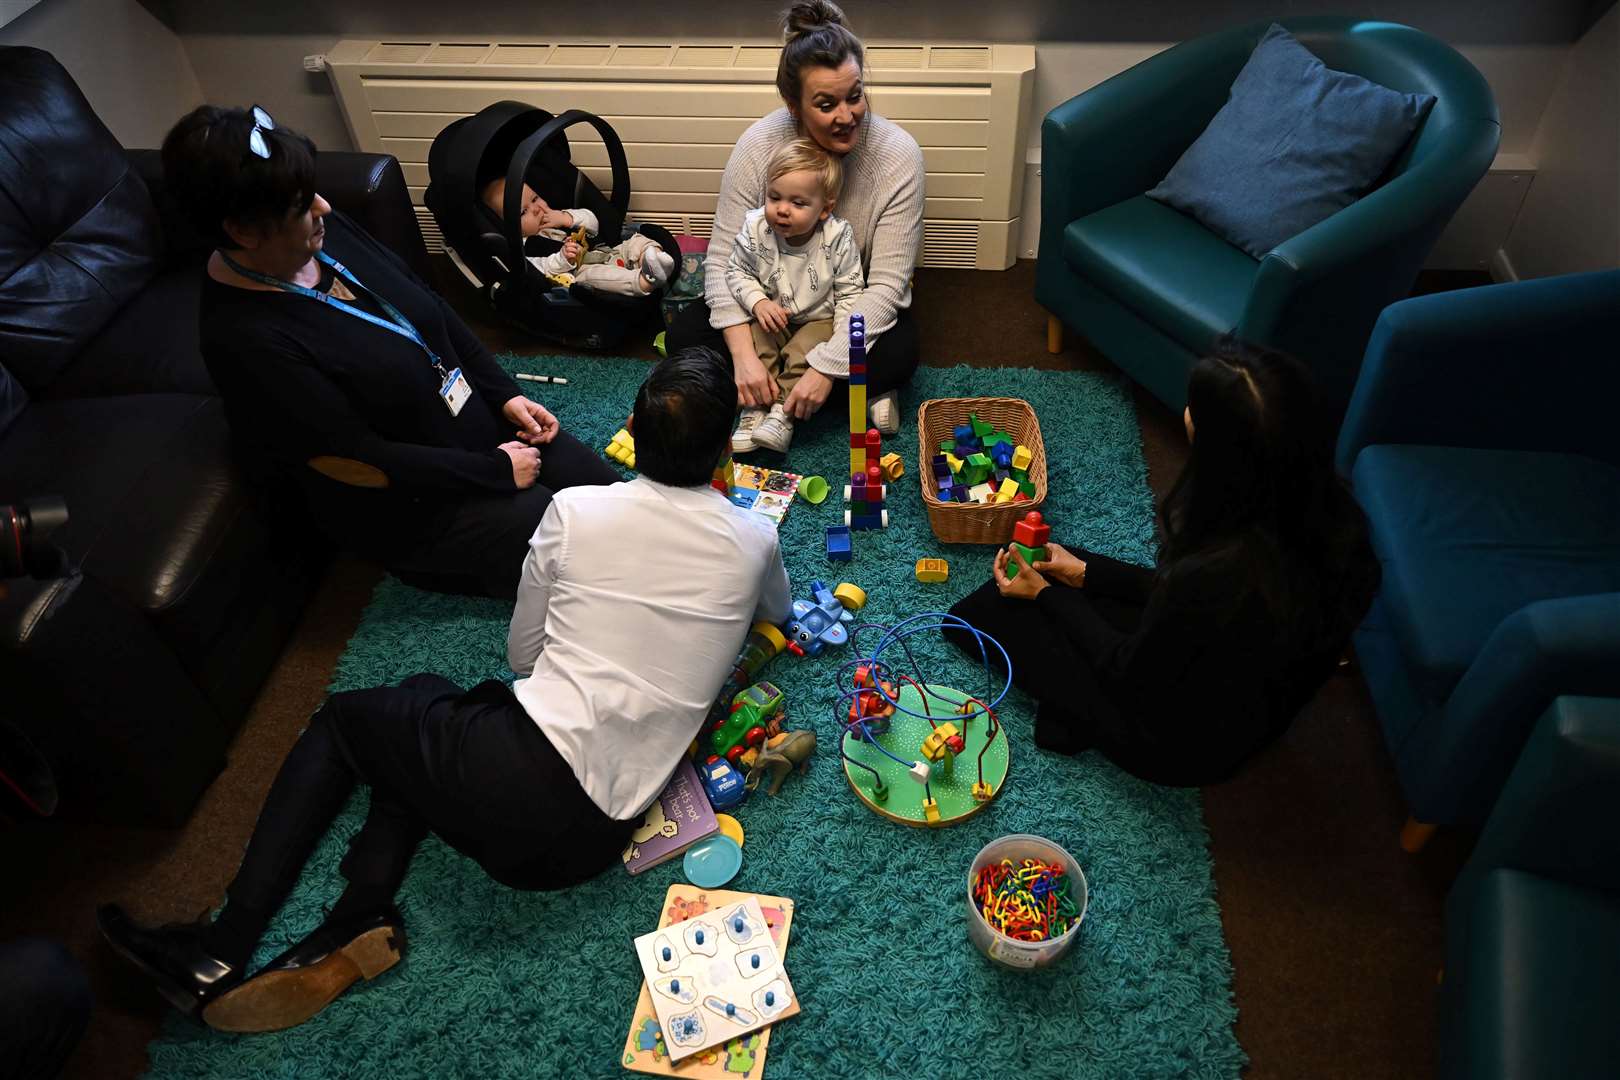 Prime Minister Rishi Sunak and his wife Akshata Murty (right) speak with Giselle, the mother of Seth, six months, and Brody, two, during the St Austell visit (Ben Stansall/PA)